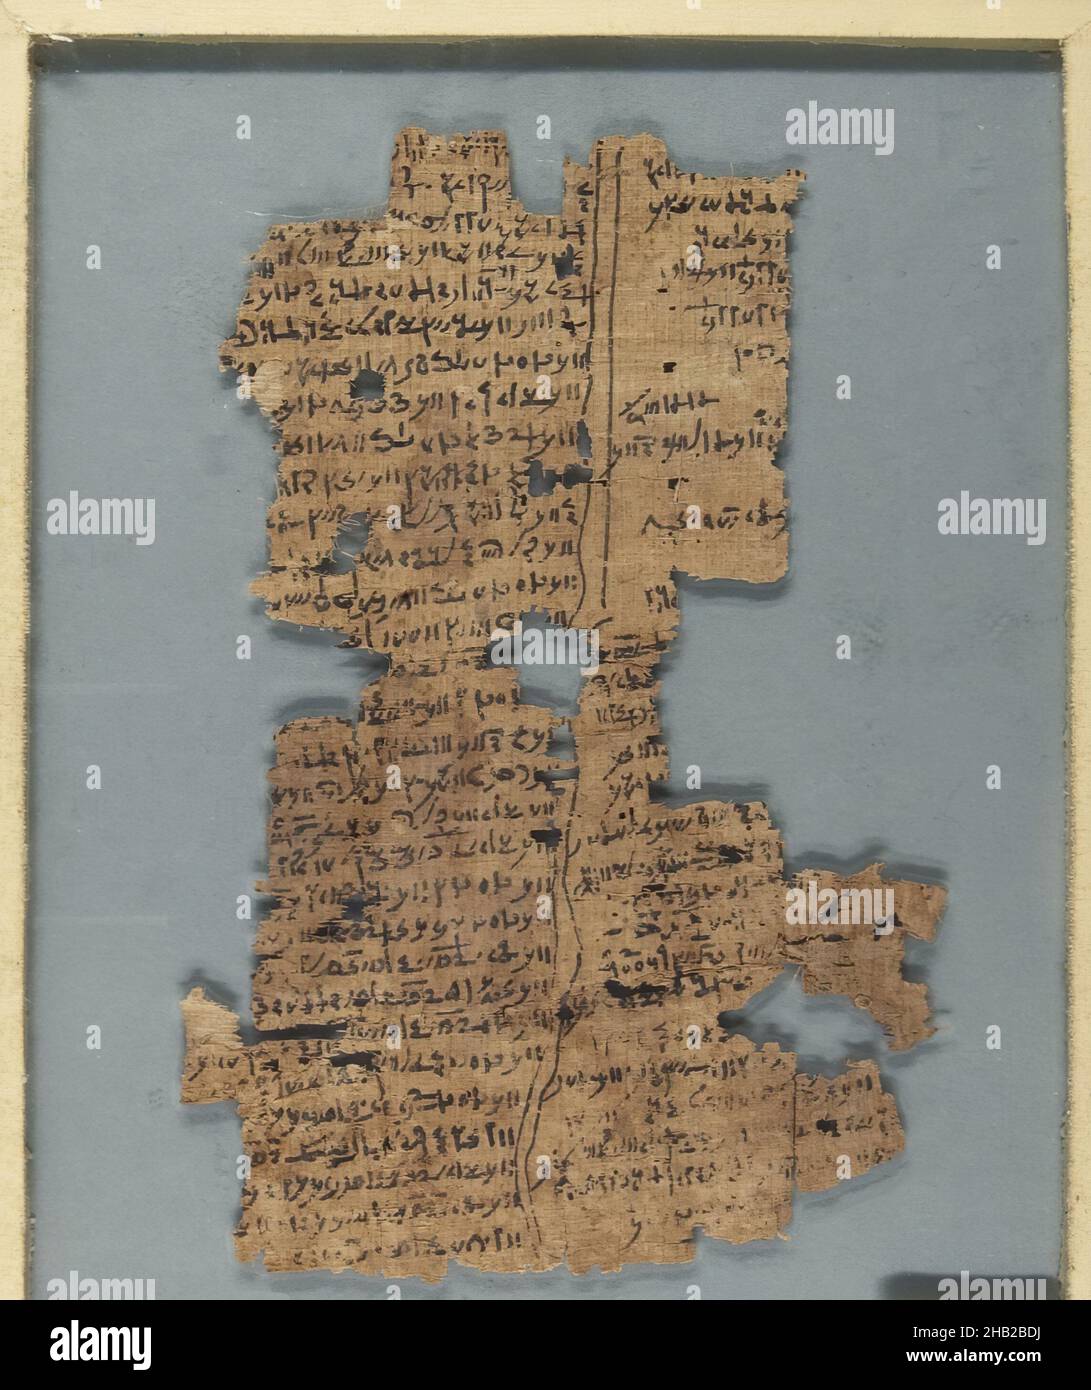 Papyrus Fragments Inscribed in Demotic or Greek, Papyrus, ink, 2nd century C.E., Roman Period, a: Glass: 8 1/16 x 10 1/16 in., 20.5 x 25.5 cm Stock Photo